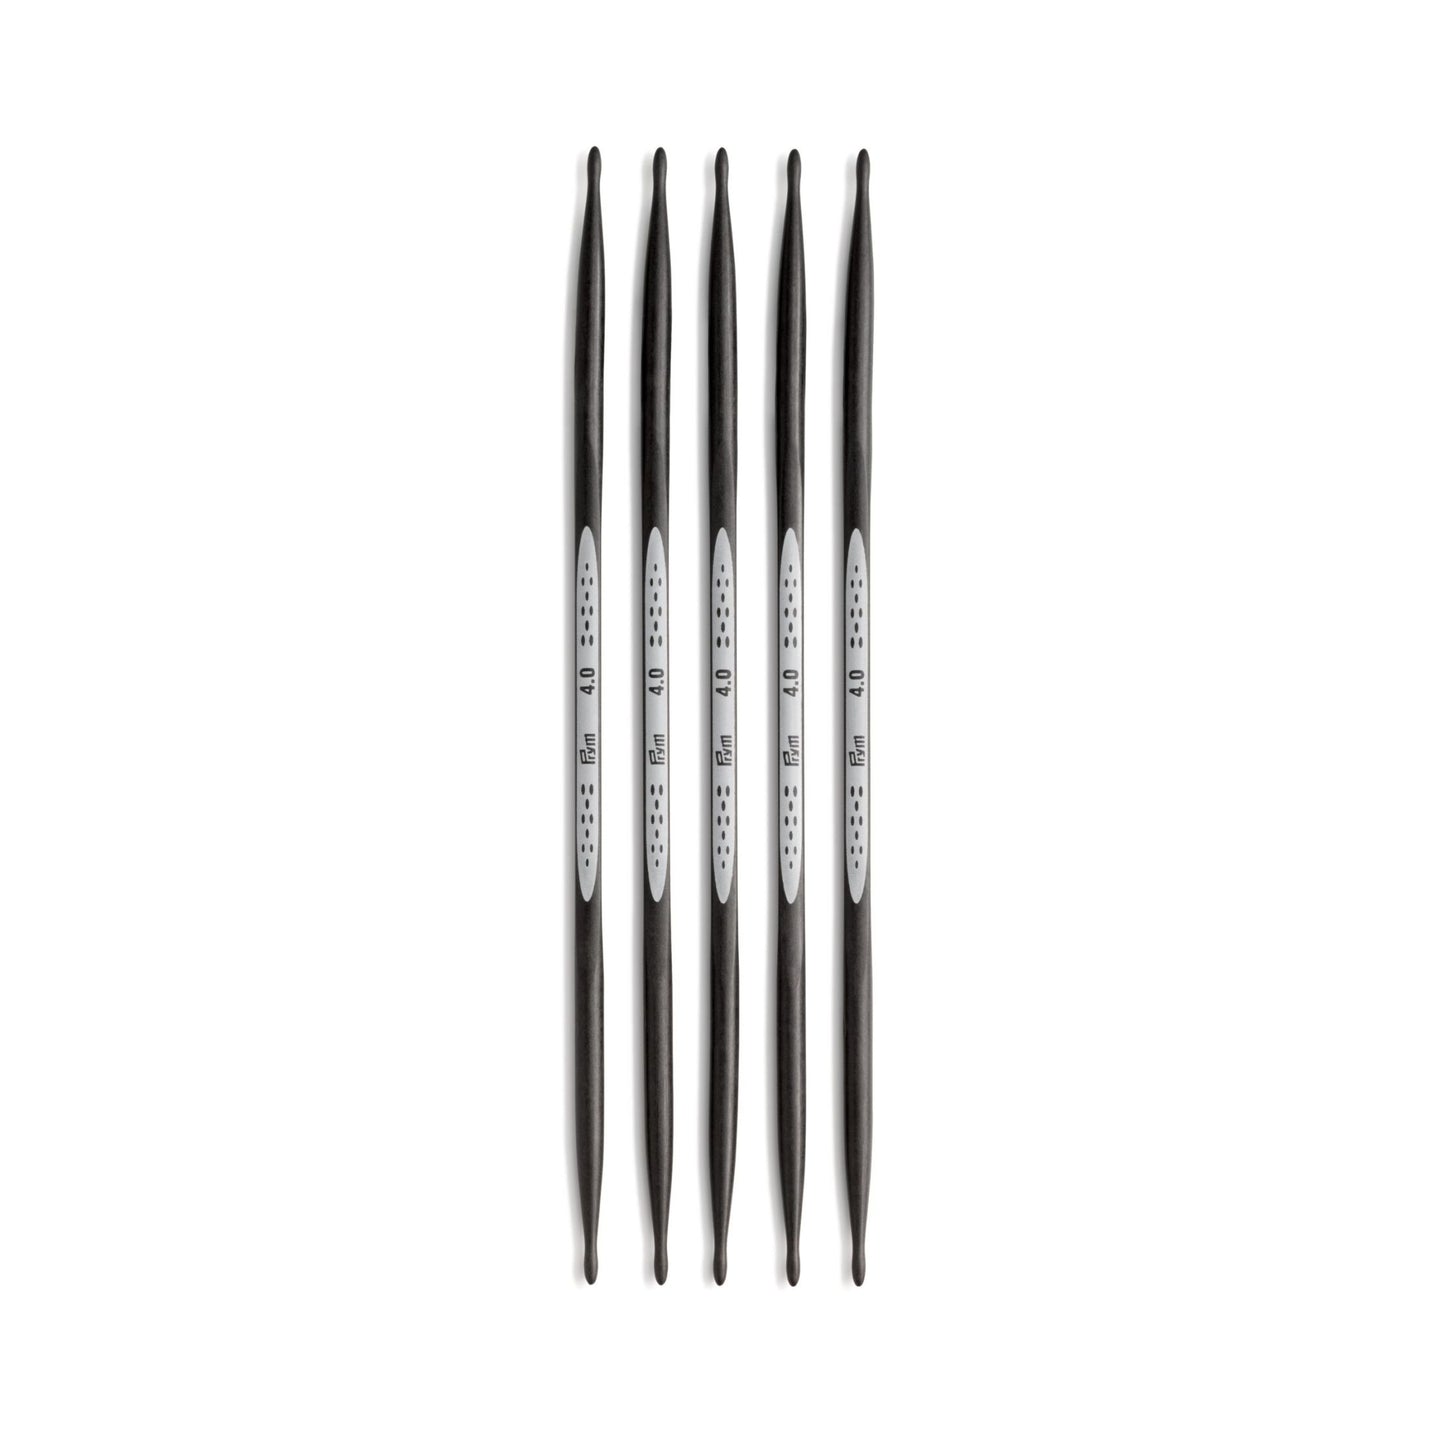 Knitting Needles Set Metal Knitting Needles Smoothing Surfaces Size  Markings for DIY Knitting Projects